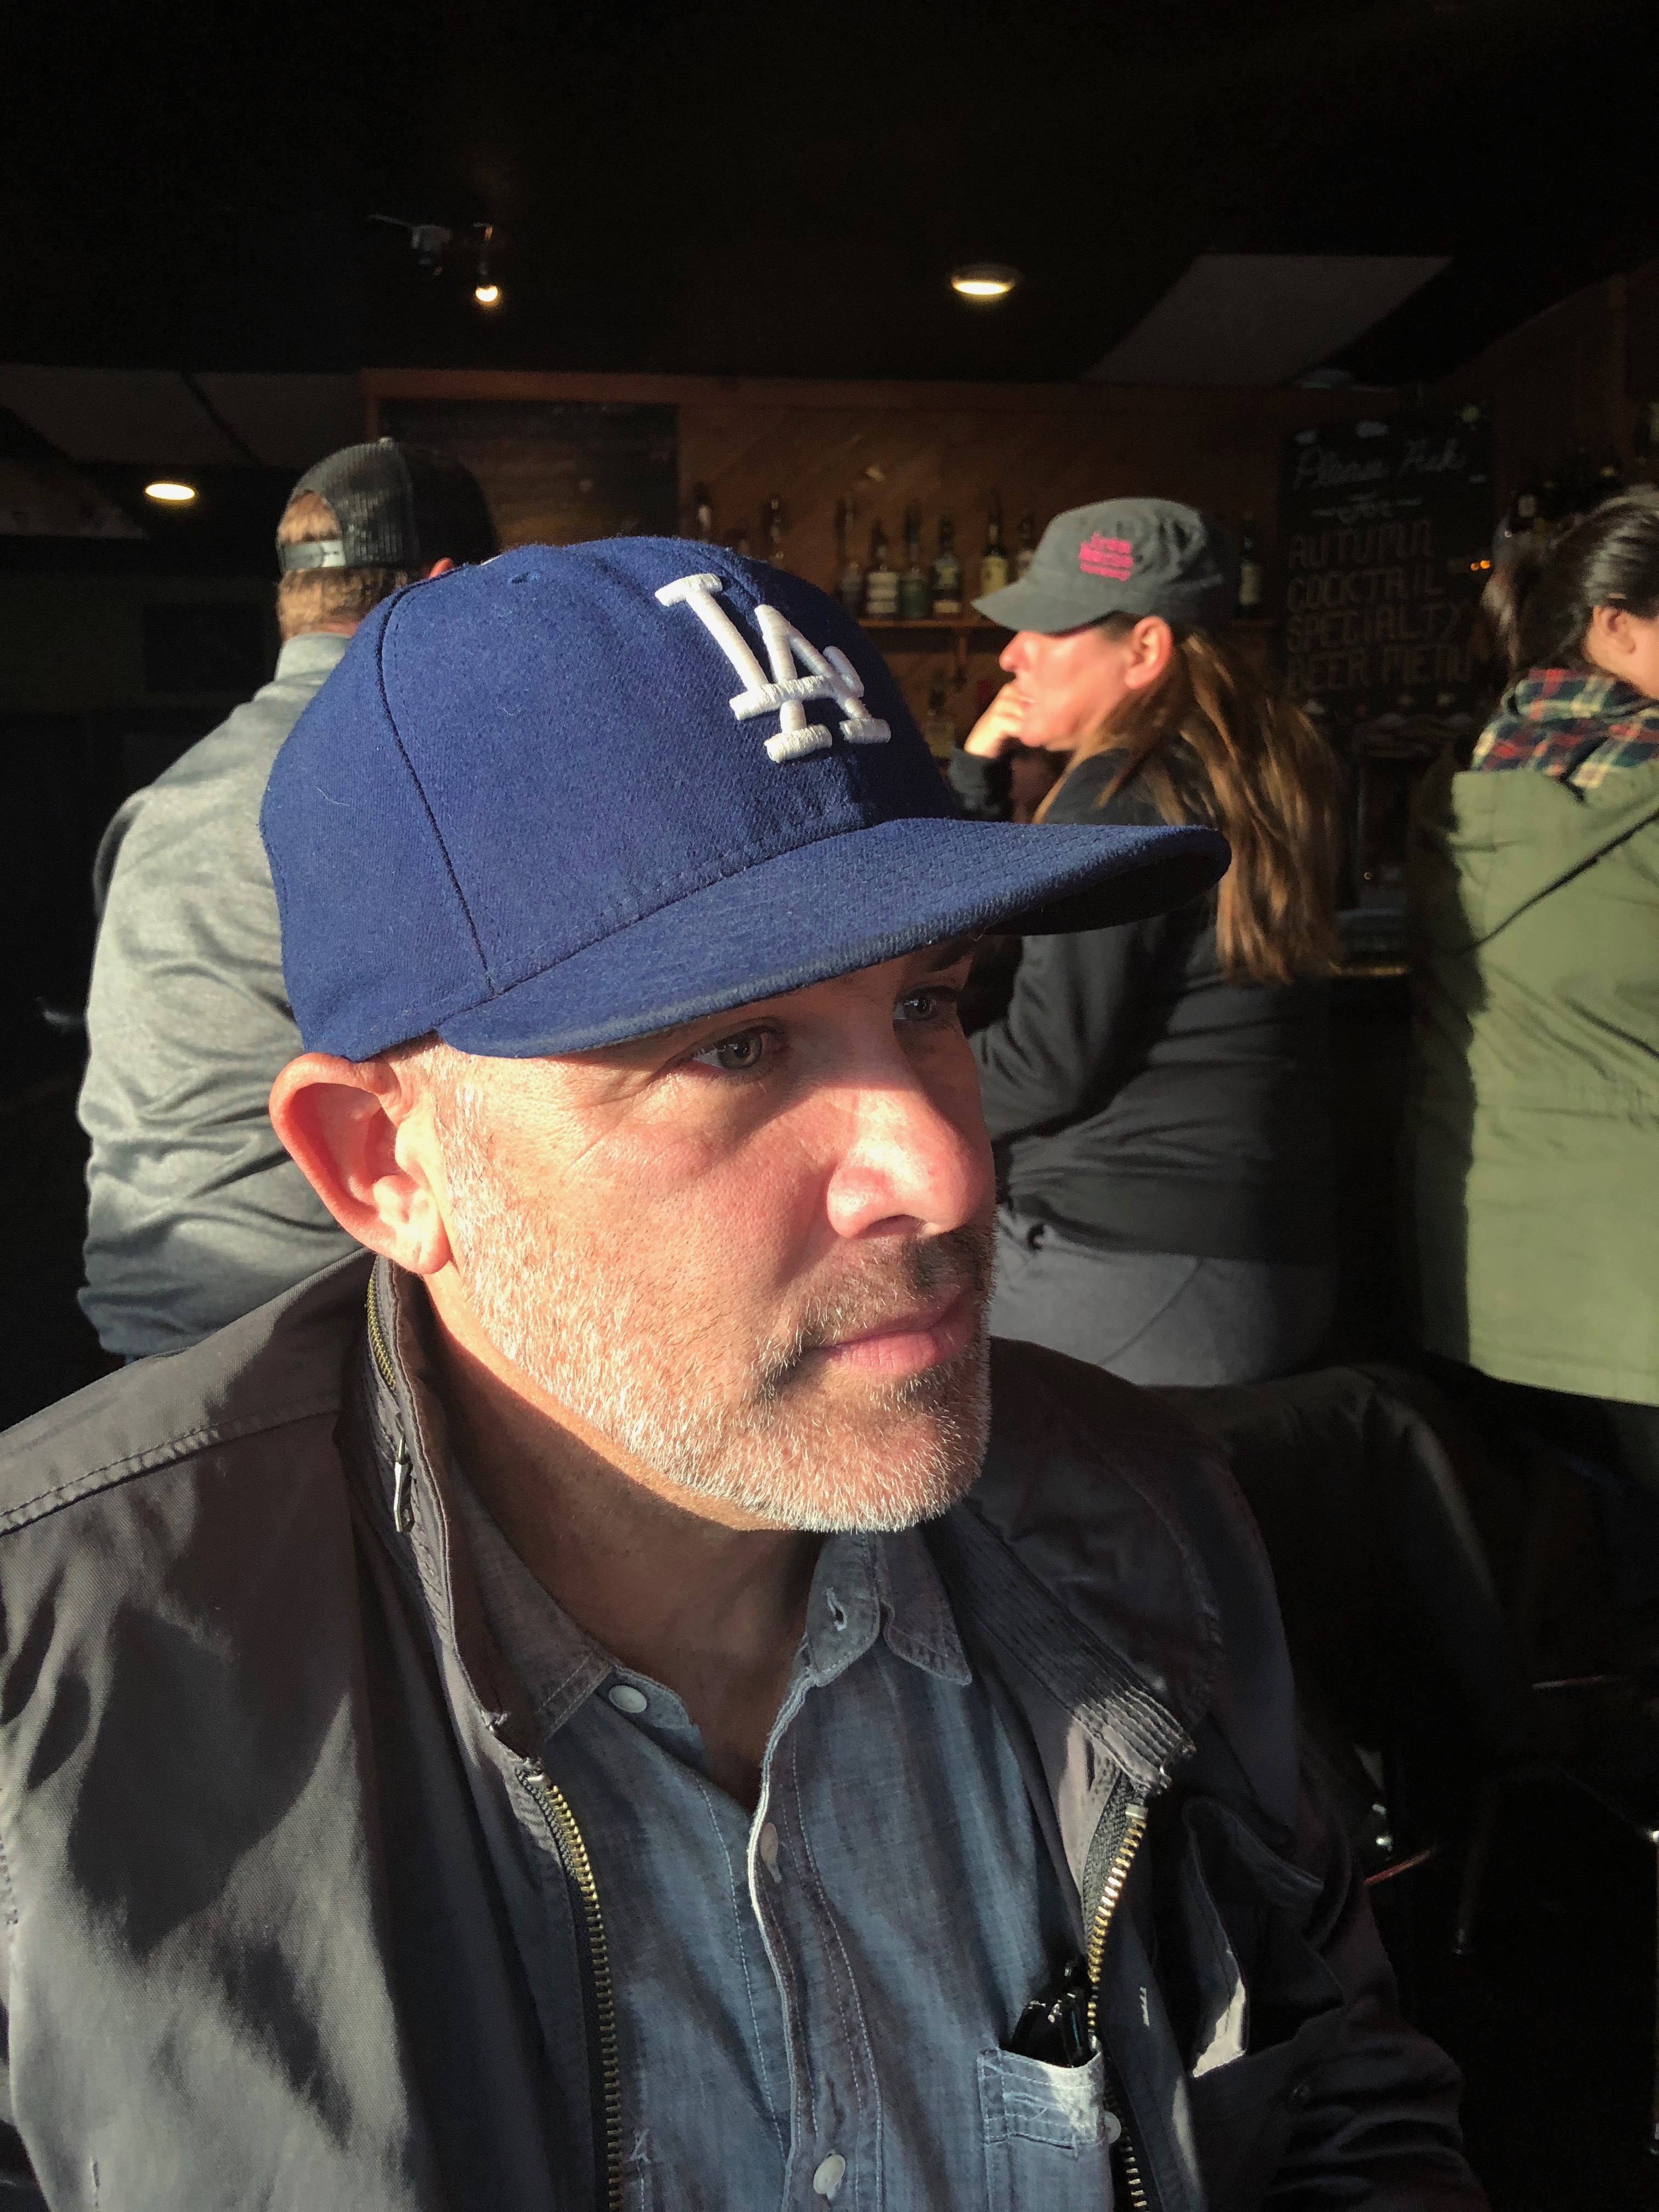 Local Beerlebrity Joseph Sundberg supports his team, the LA Dodgers during Killer Beer Summit at Roscoe's.